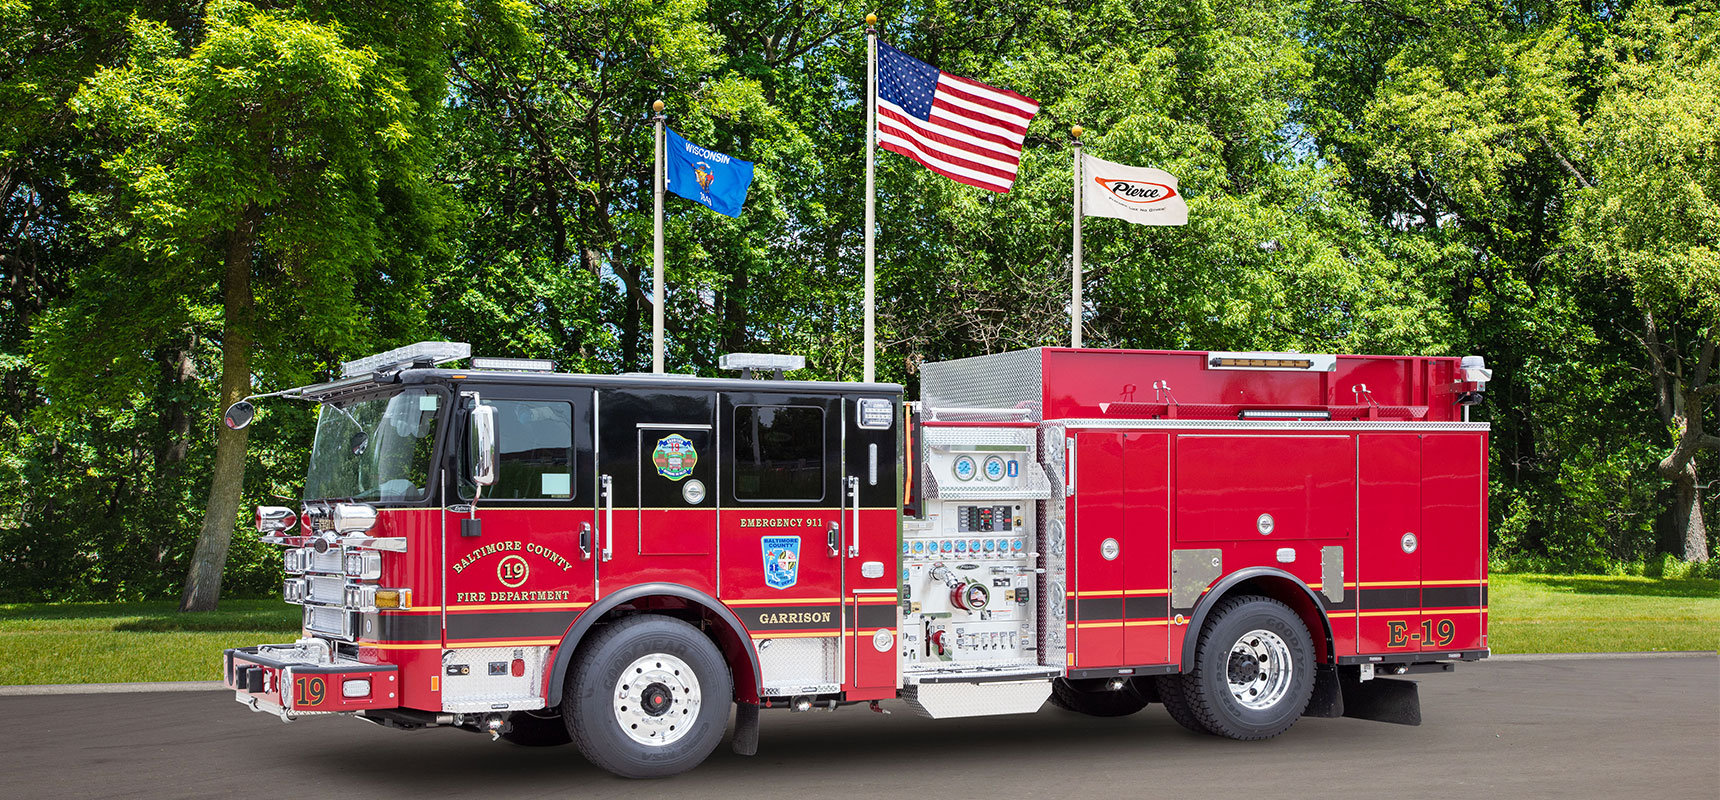 Baltimore County Fire Department has placed an order for 23 custom Pierce fire apparatus